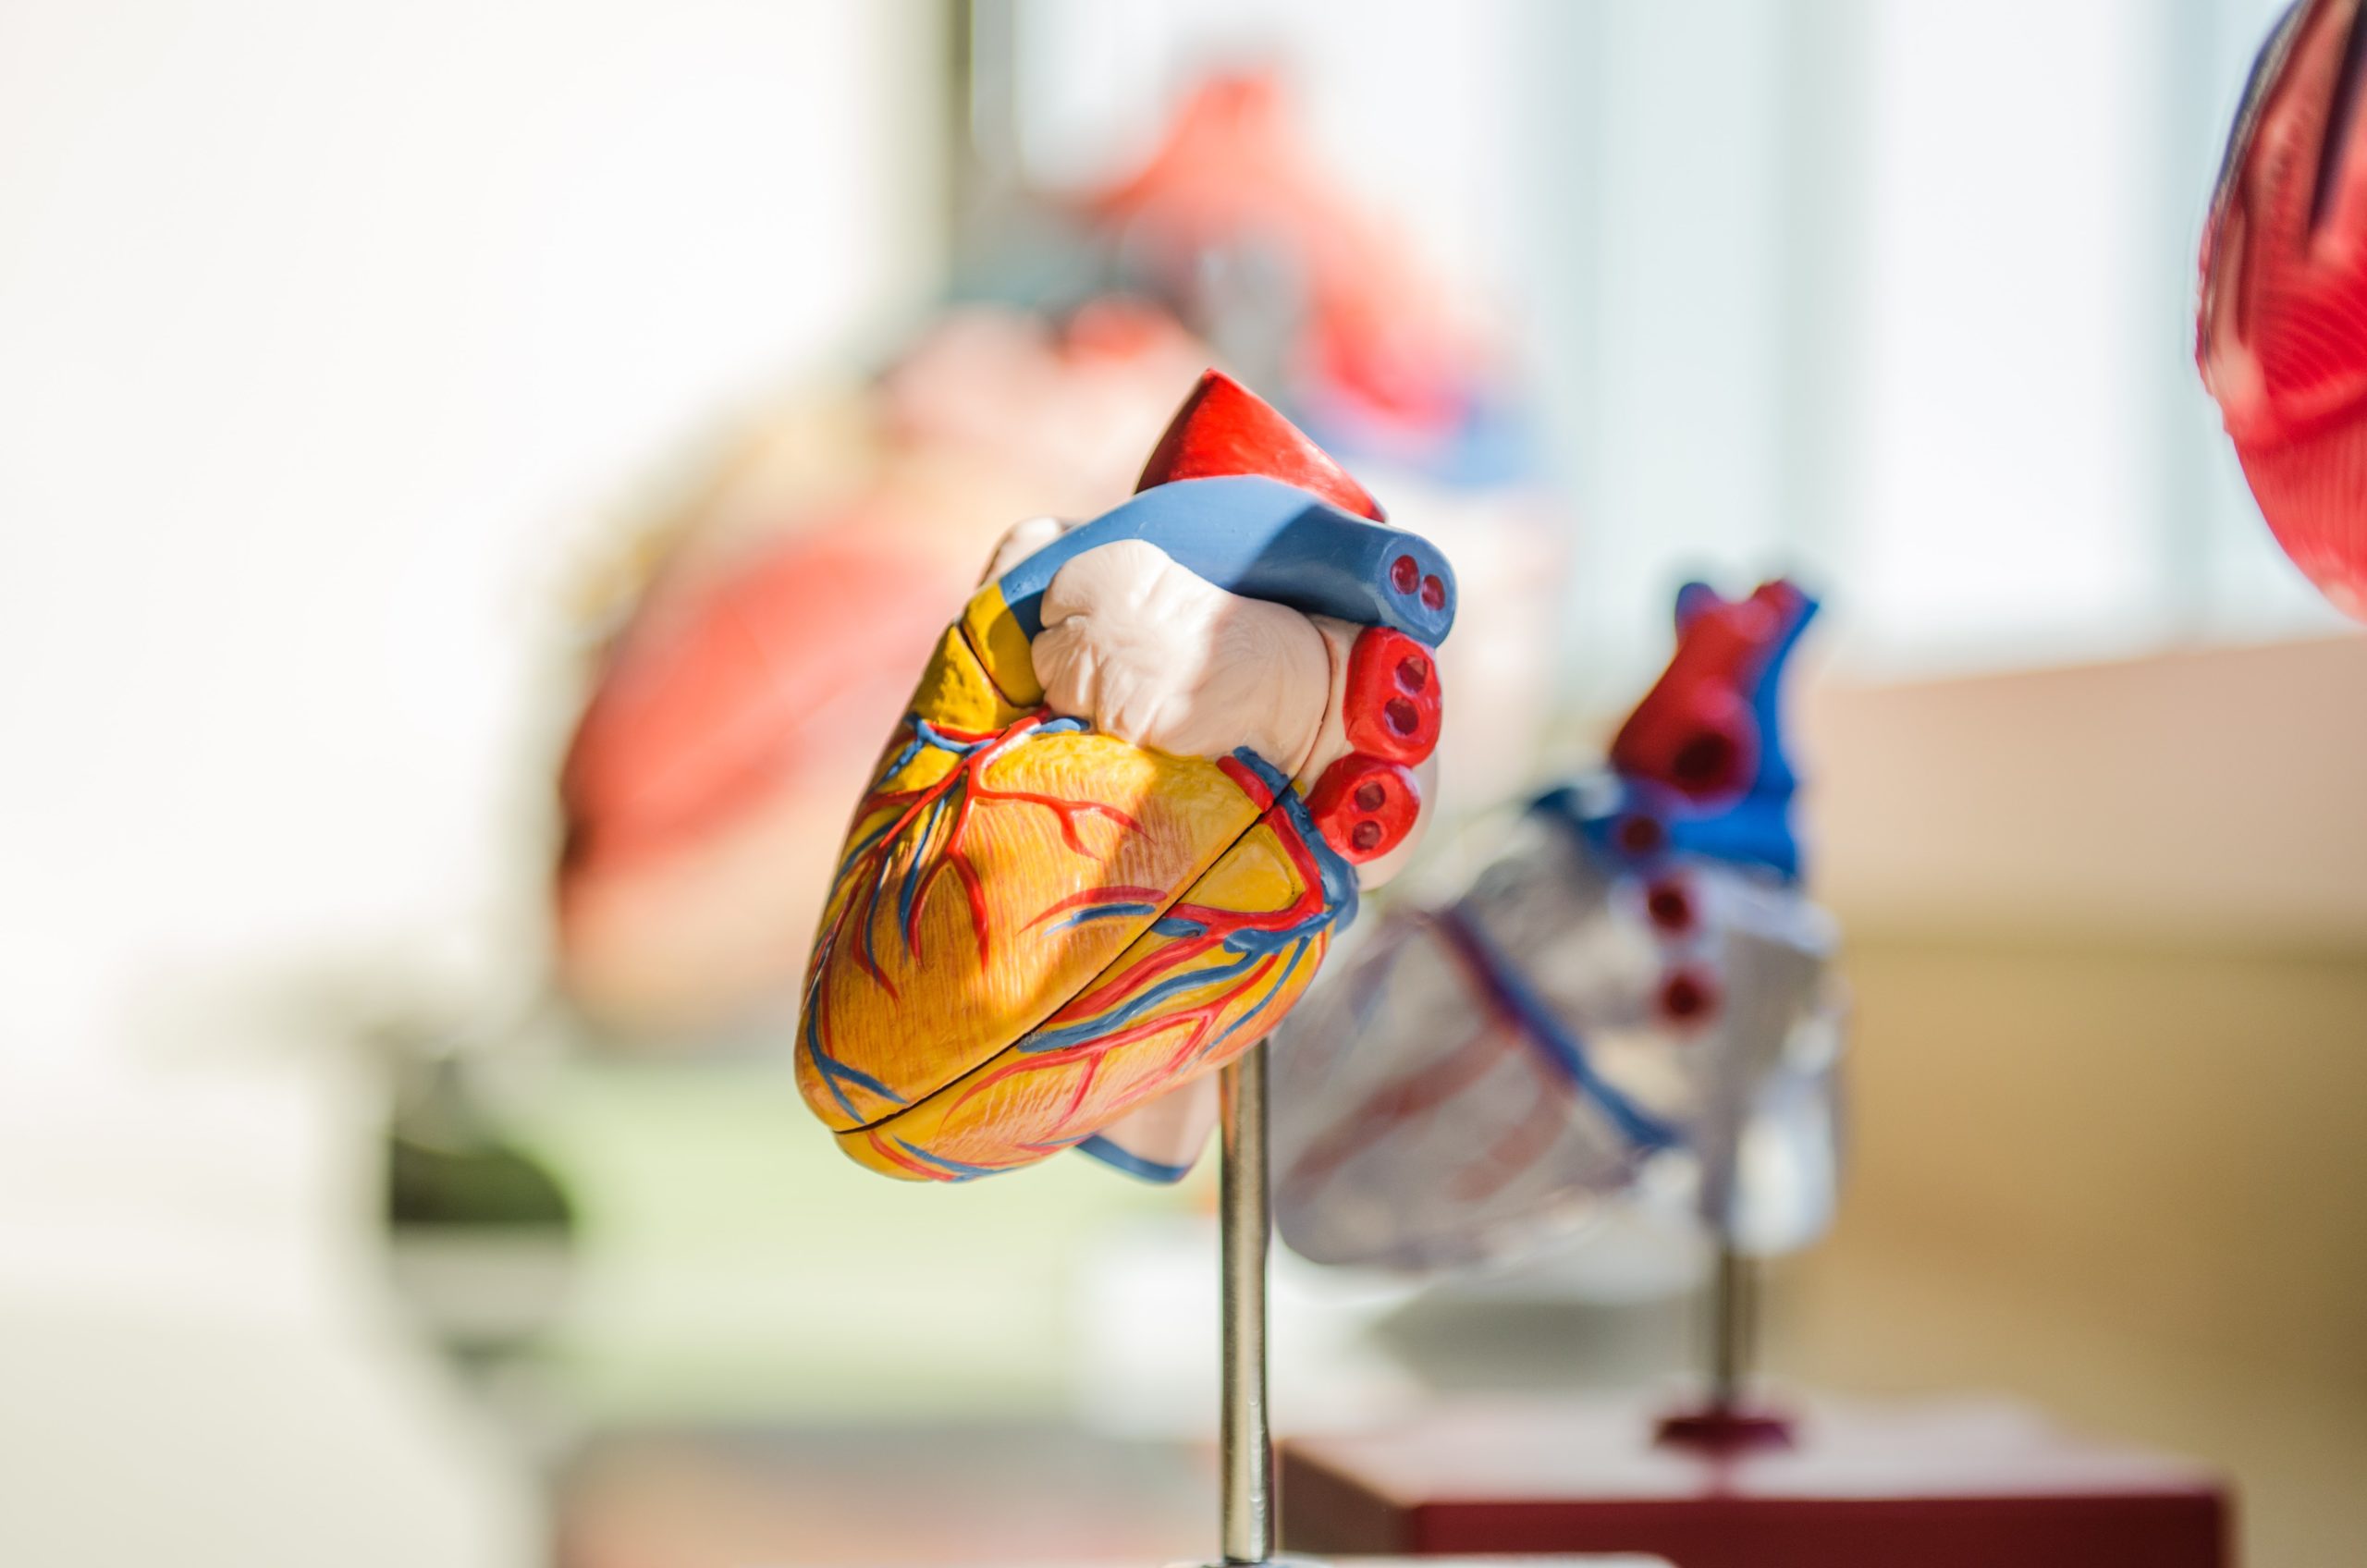 model heart used for heart treatment advancements